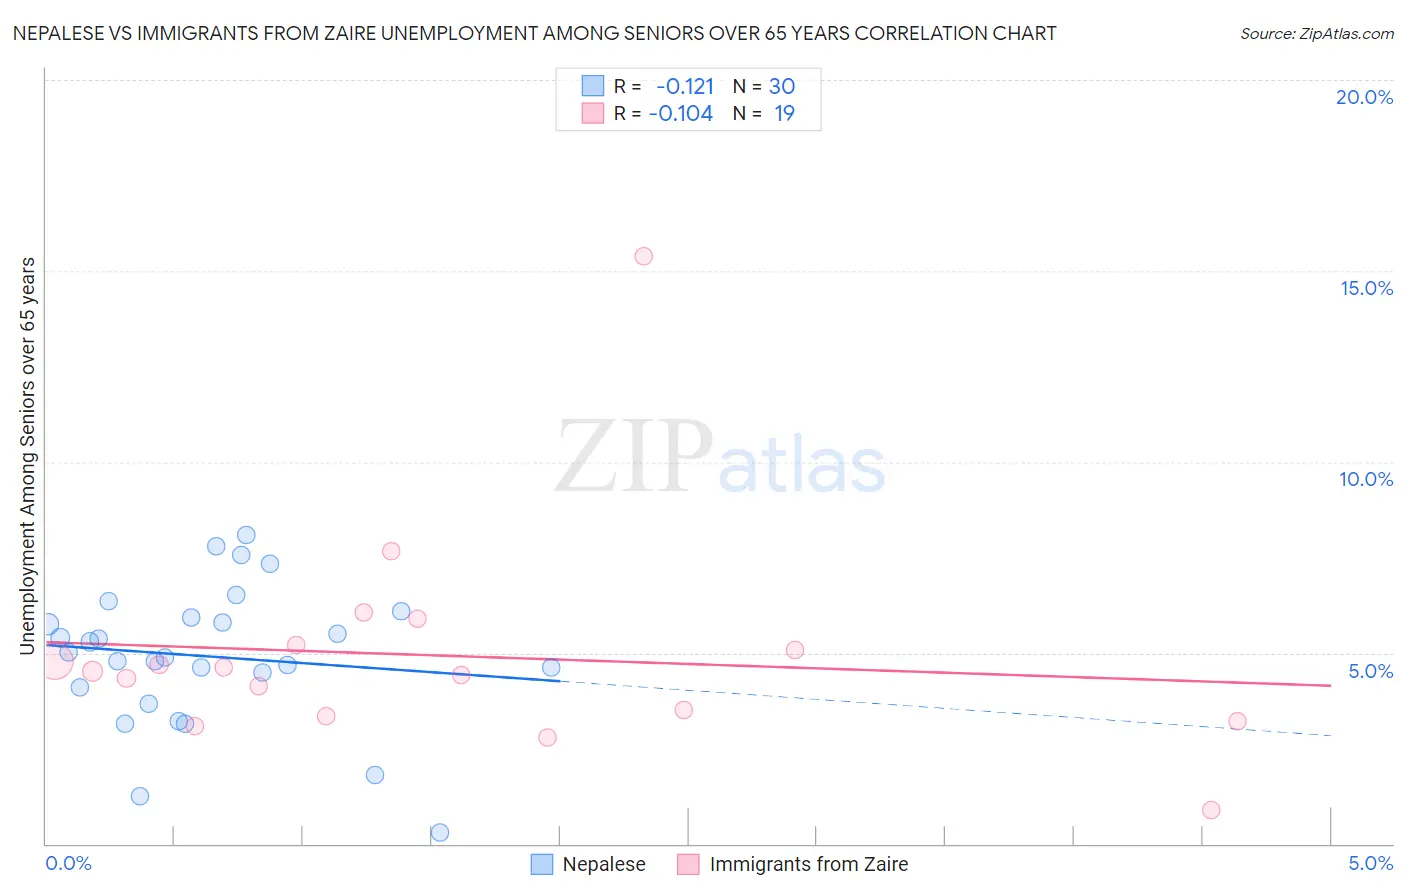 Nepalese vs Immigrants from Zaire Unemployment Among Seniors over 65 years